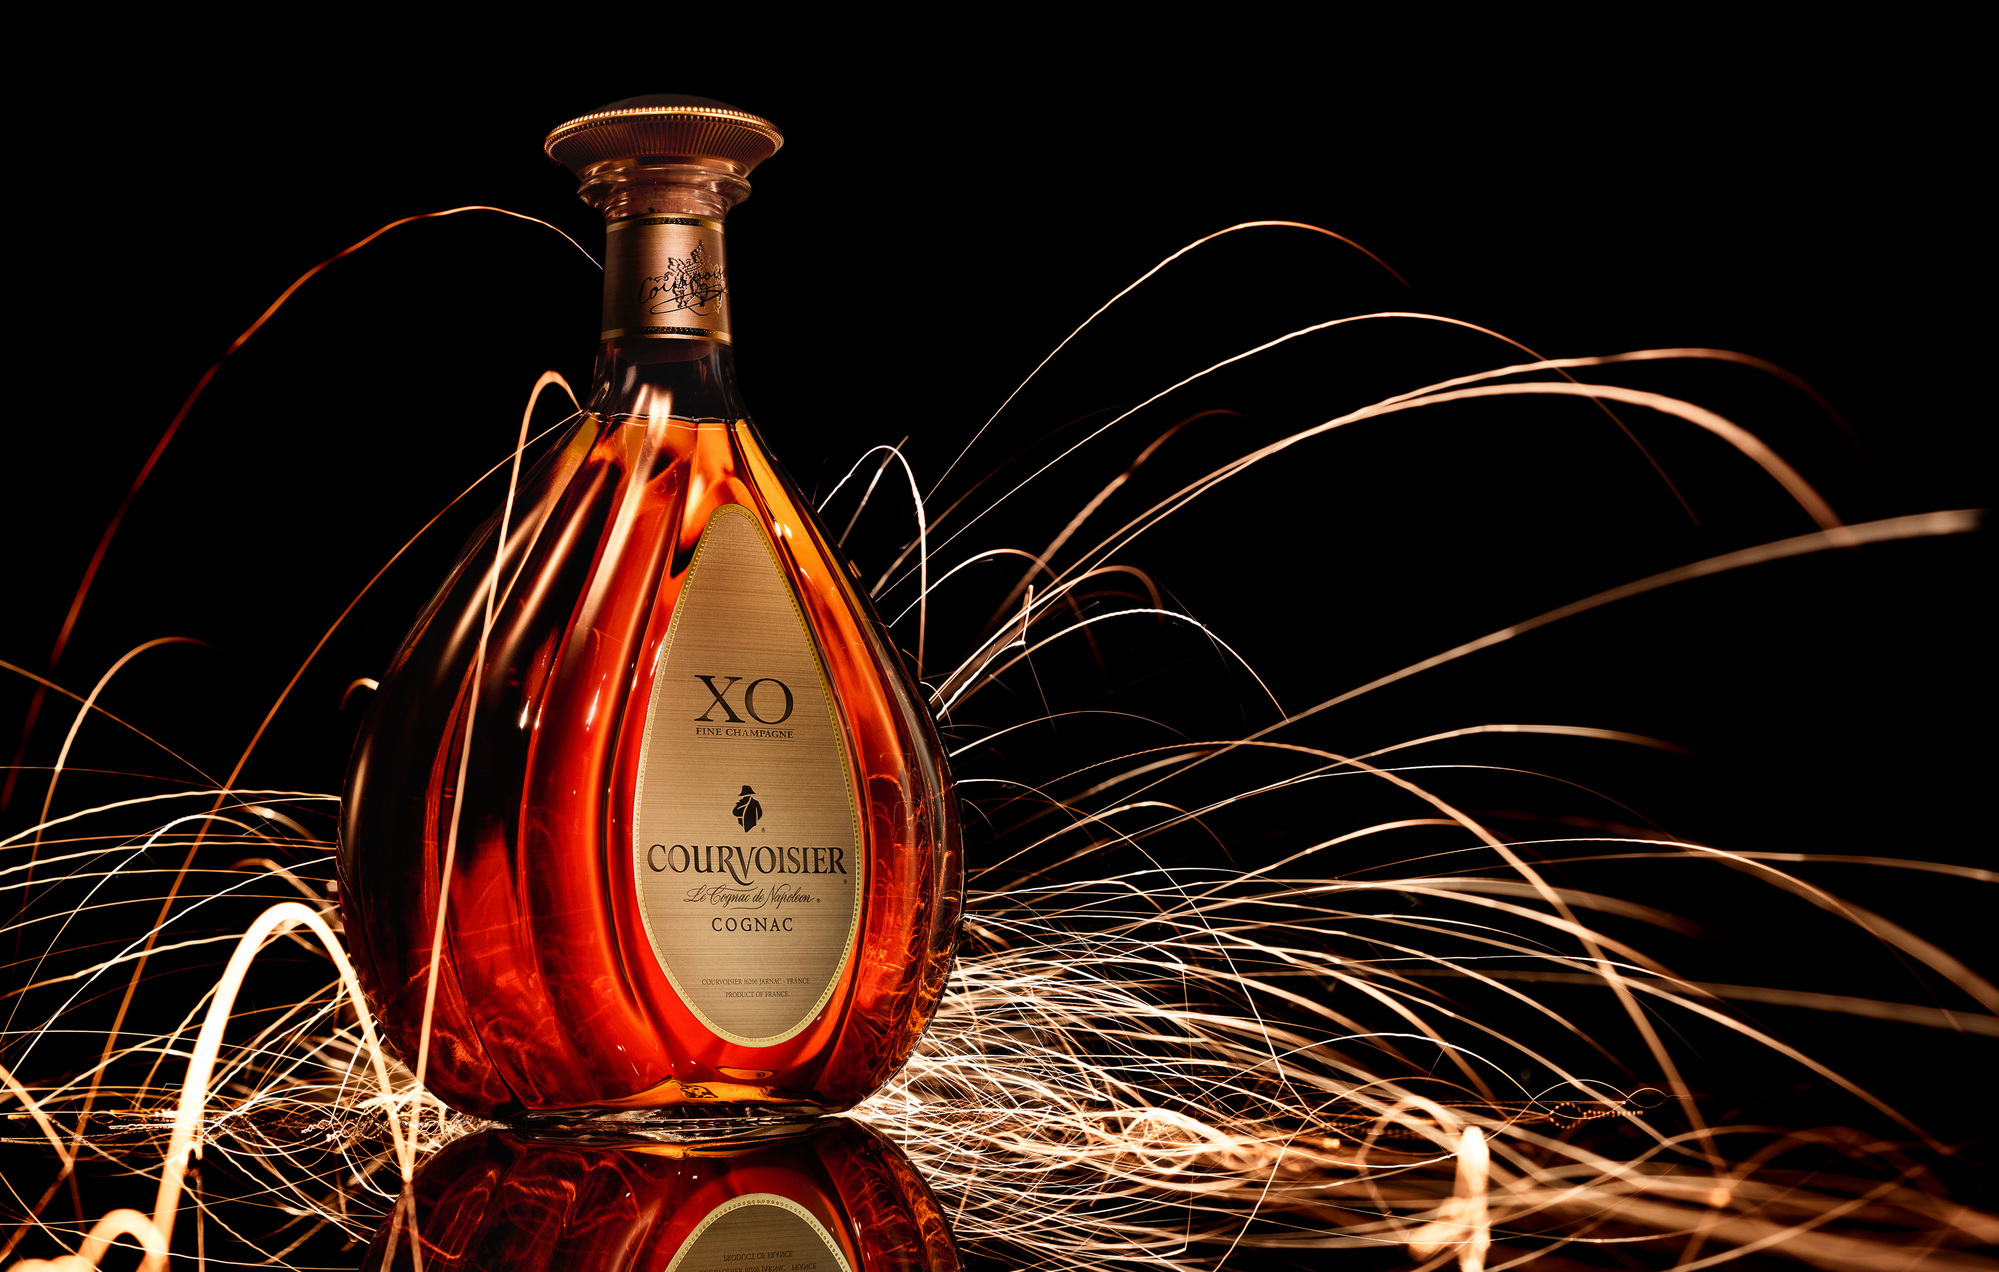 Courvoisier XO Sparks bottle photography. Beverage and liquid product & advertising photography by Timothy Hogan Studio in Los Angeles